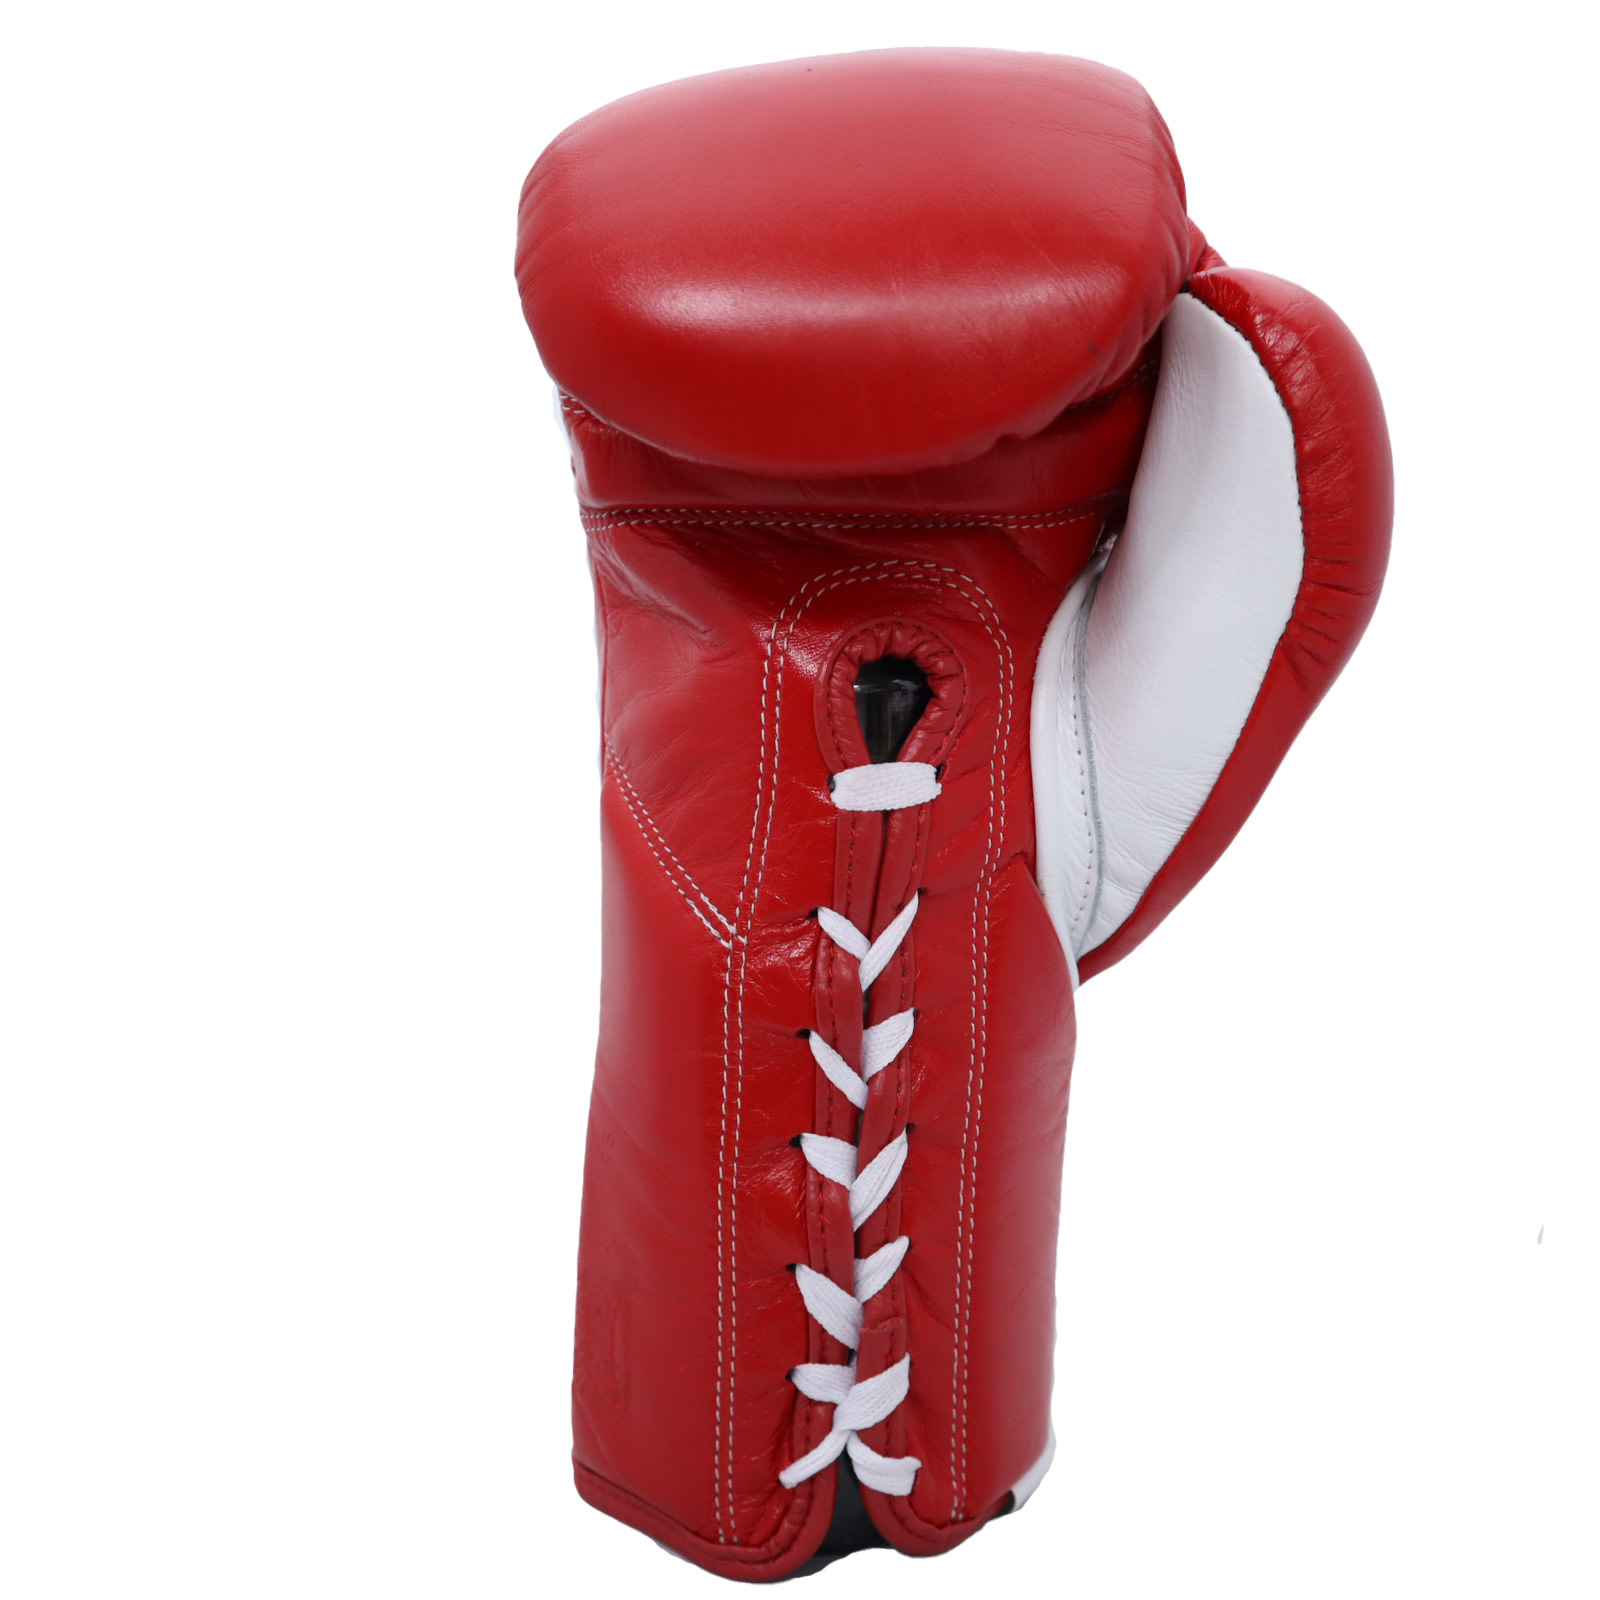 Authentic Cleto Reyes RED leather 16oz Sparring gloves 